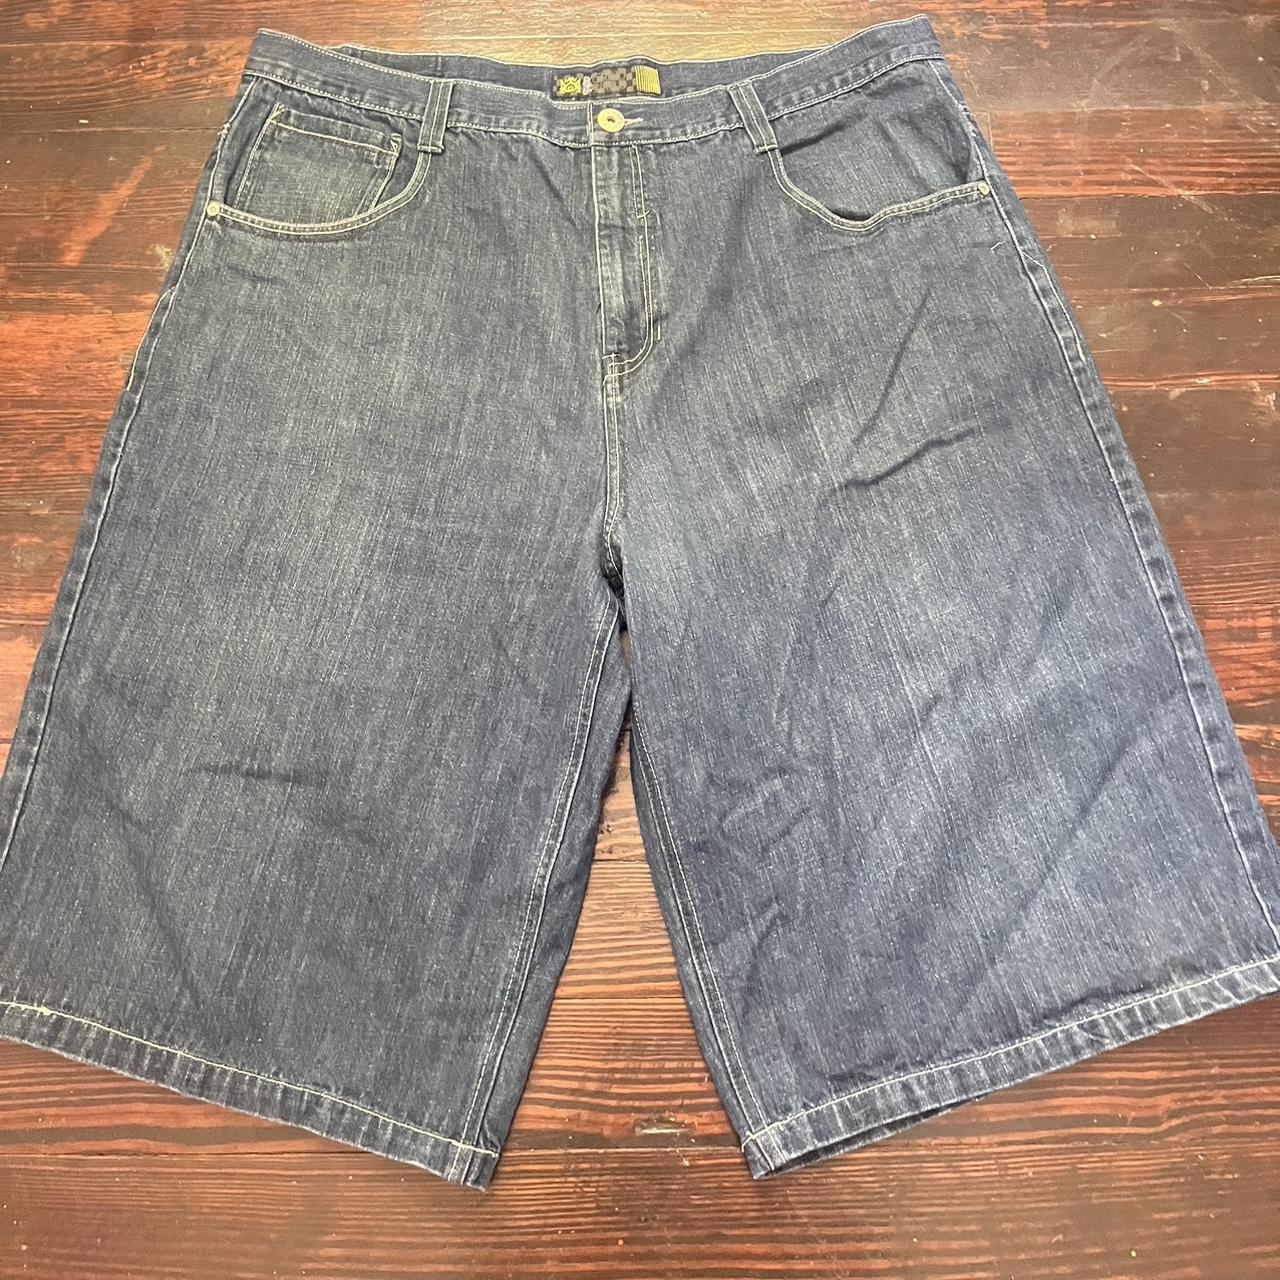 hUMONGOUS JNCO STYLE SOUTHPOLE JORTS!! These are... - Depop